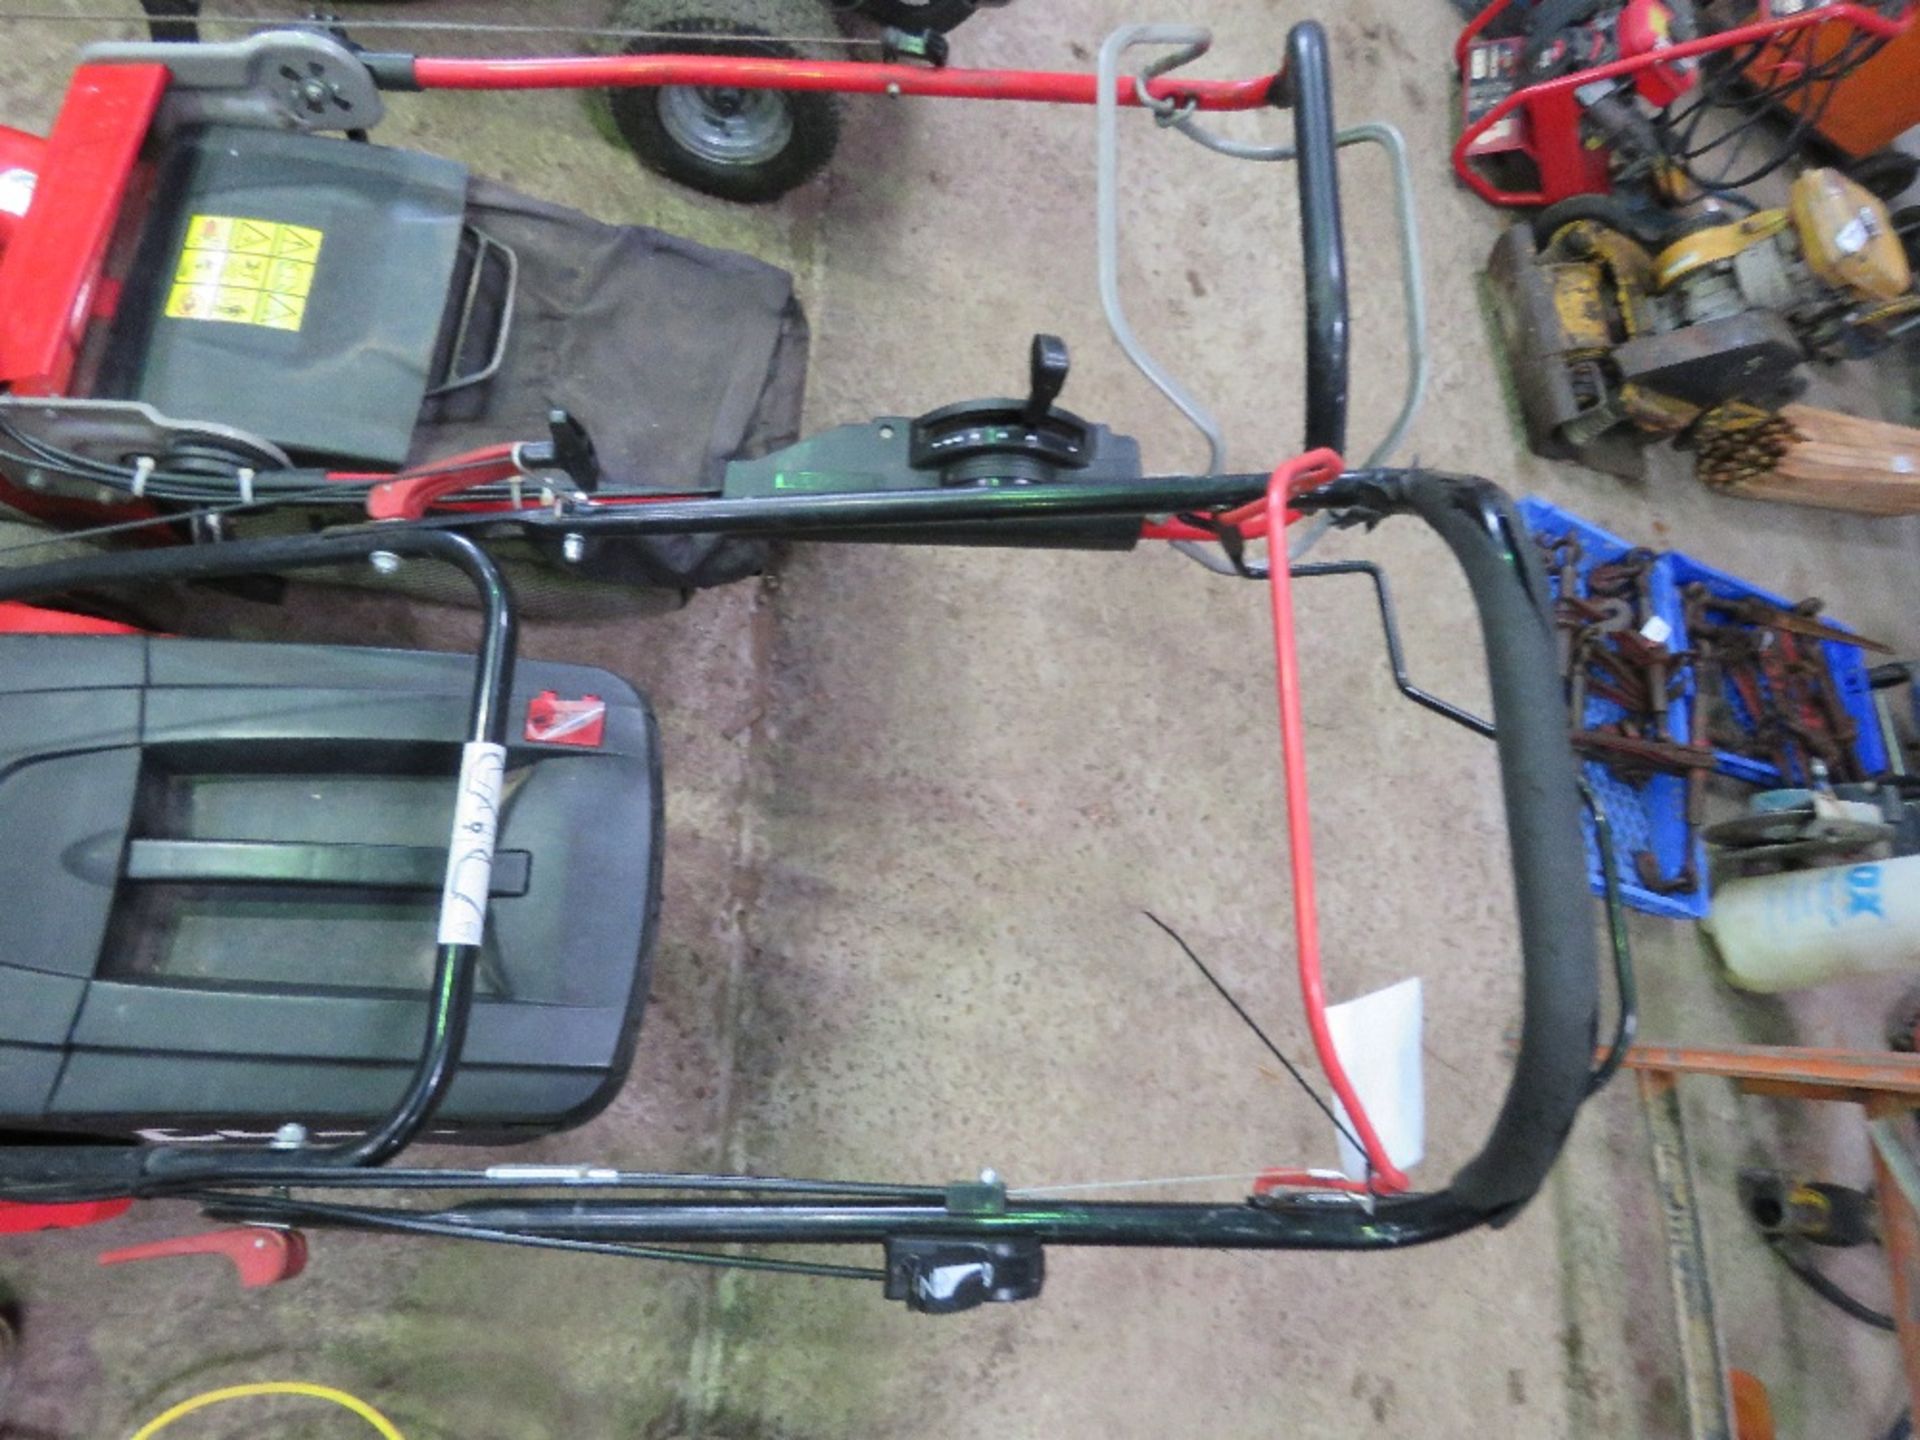 COBRA PETROL ENGINED ROLLER MOWER WITH COLLECTOR. WHEN TESTED WAS SEEN TO RUN AND DRIVE. THIS LOT - Image 3 of 3